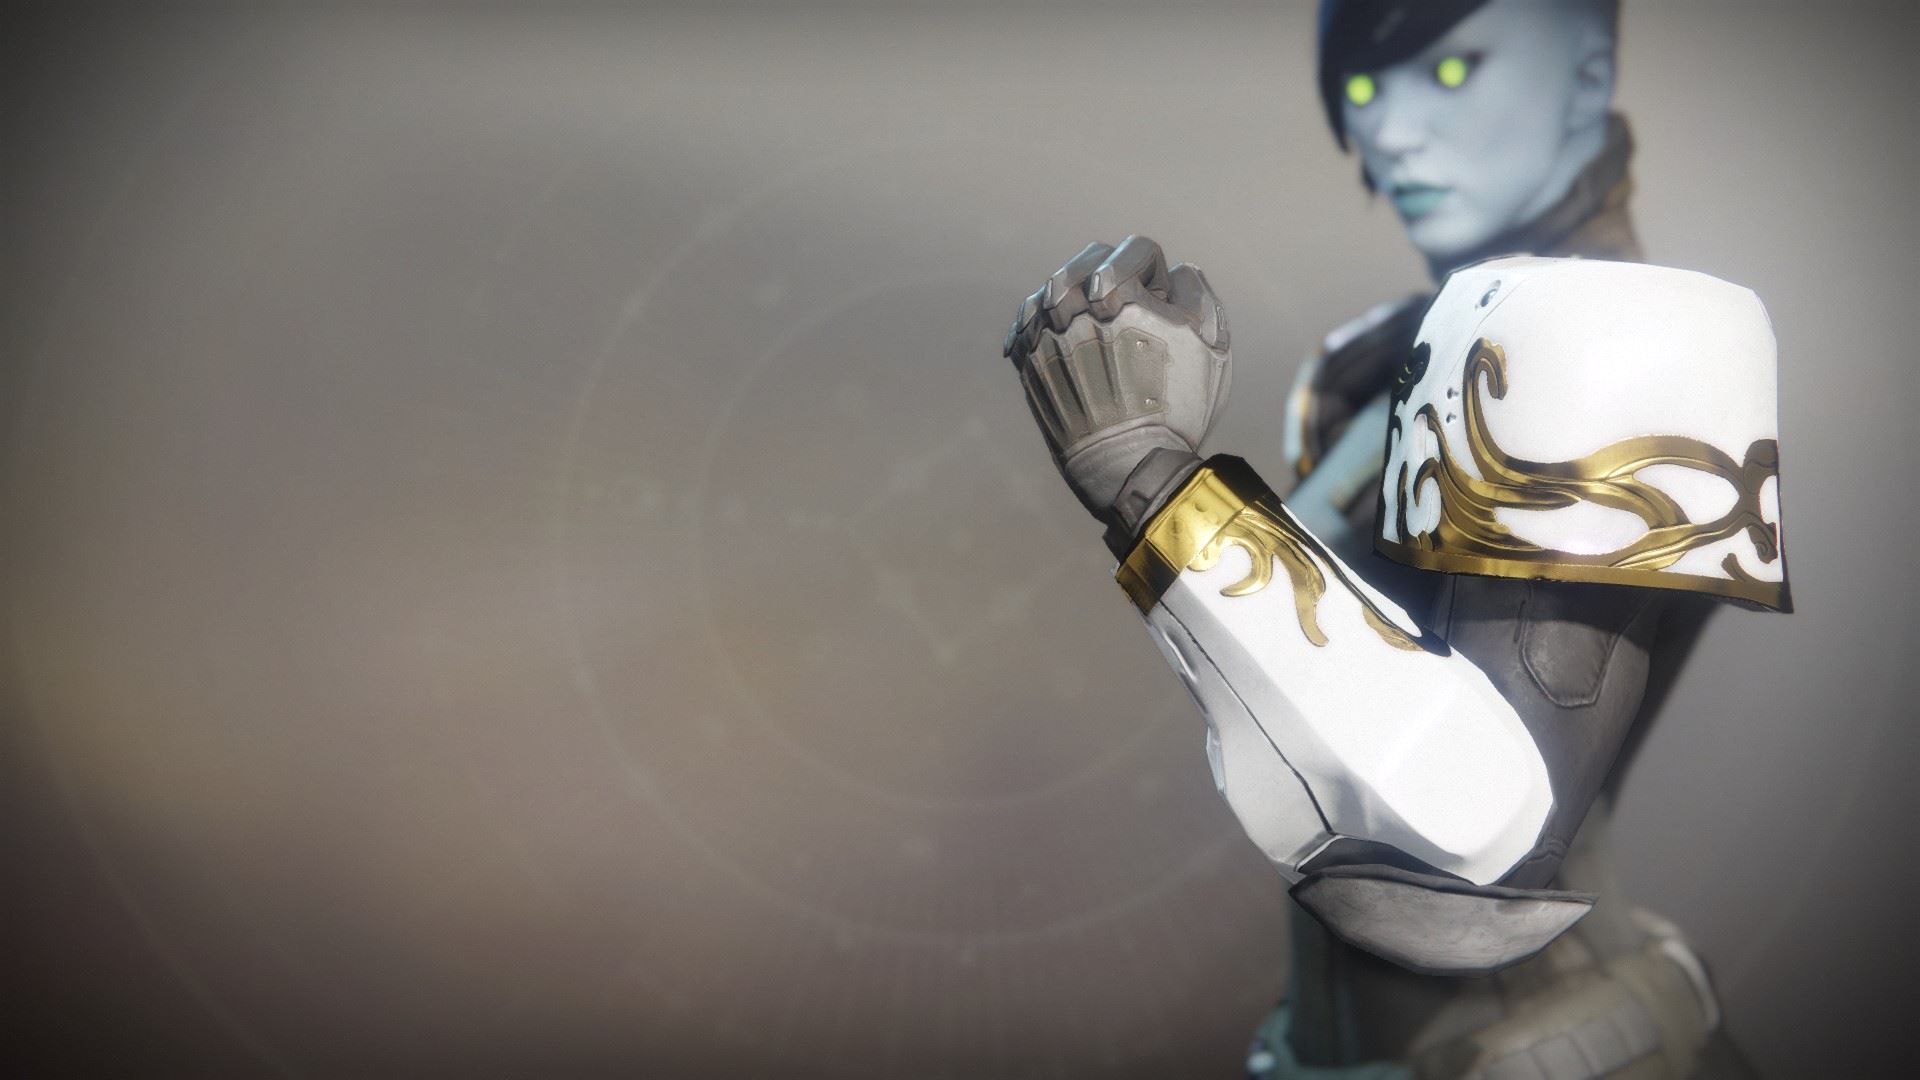 An in-game render of the Solstice Gauntlets (Resplendent).